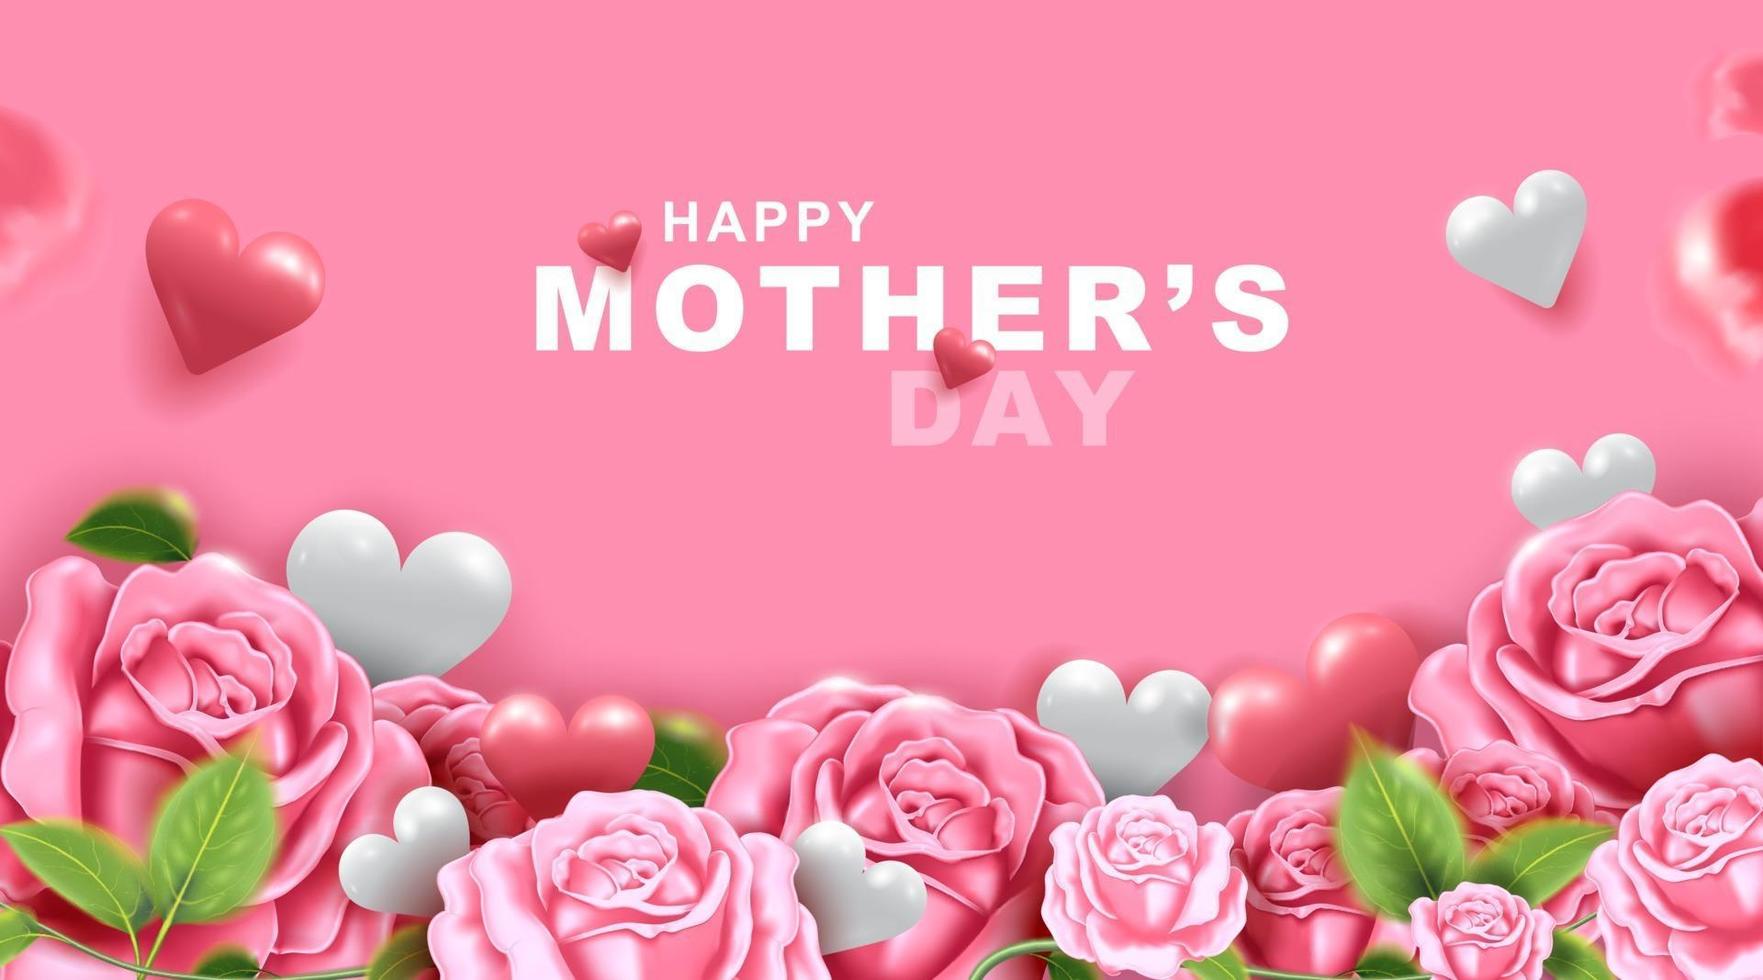 Mothers day greeting card with beautiful blossom flowers background vector